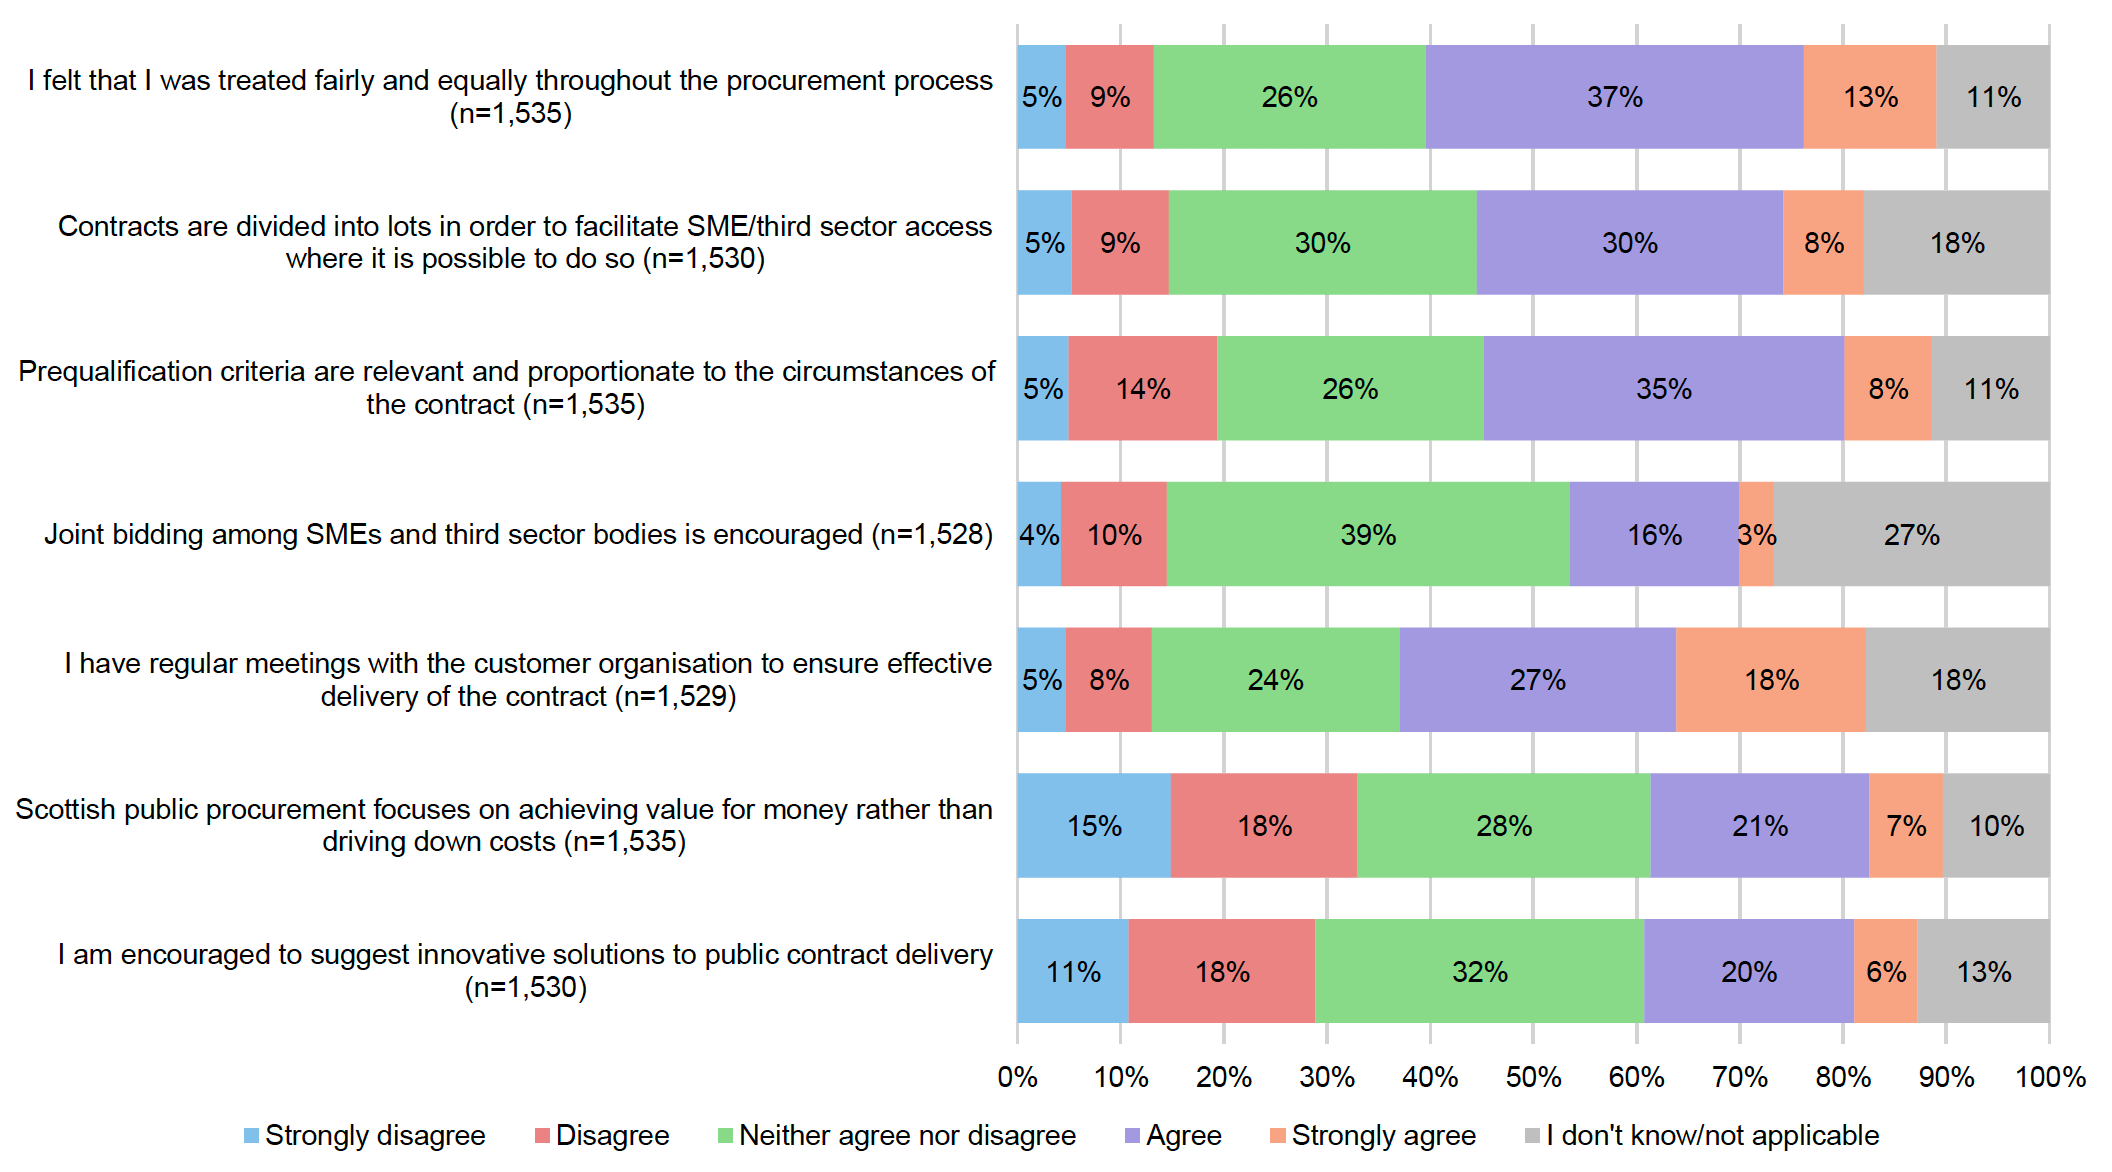 Figure 3.8 shows survey respondents’ levels of agreement with a variety of statements in respect of Scottish public procurement. For example, it shows that 50% of respondents ‘agreed’ or ‘strongly agreed’ with the statement “I felt that I was treated fairly and equally throughout the procurement process”.